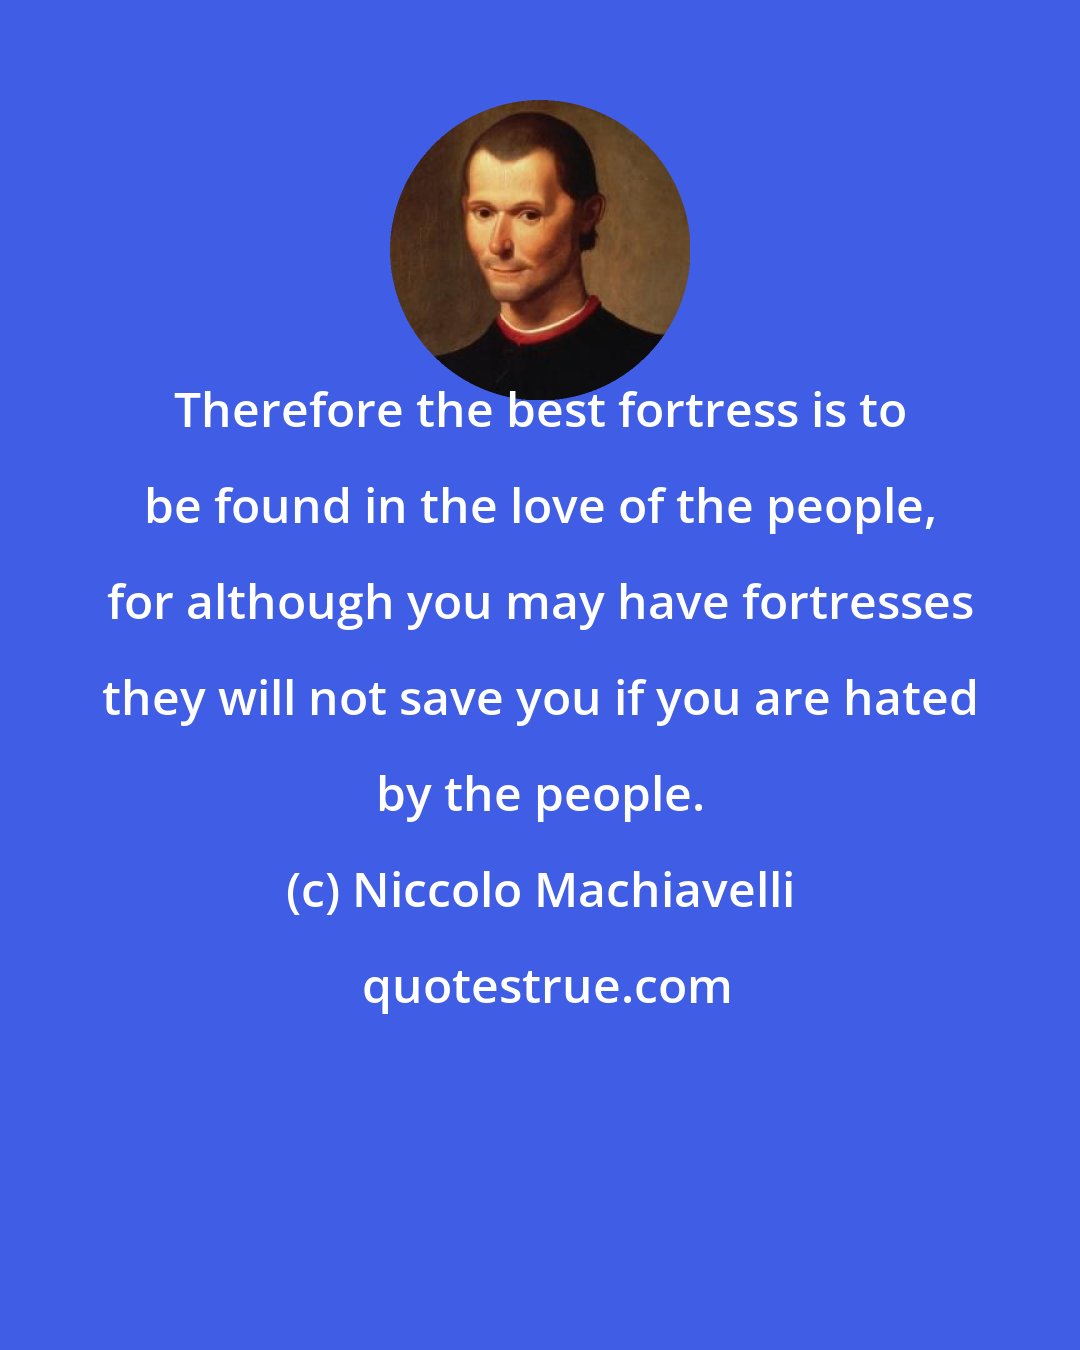 Niccolo Machiavelli: Therefore the best fortress is to be found in the love of the people, for although you may have fortresses they will not save you if you are hated by the people.